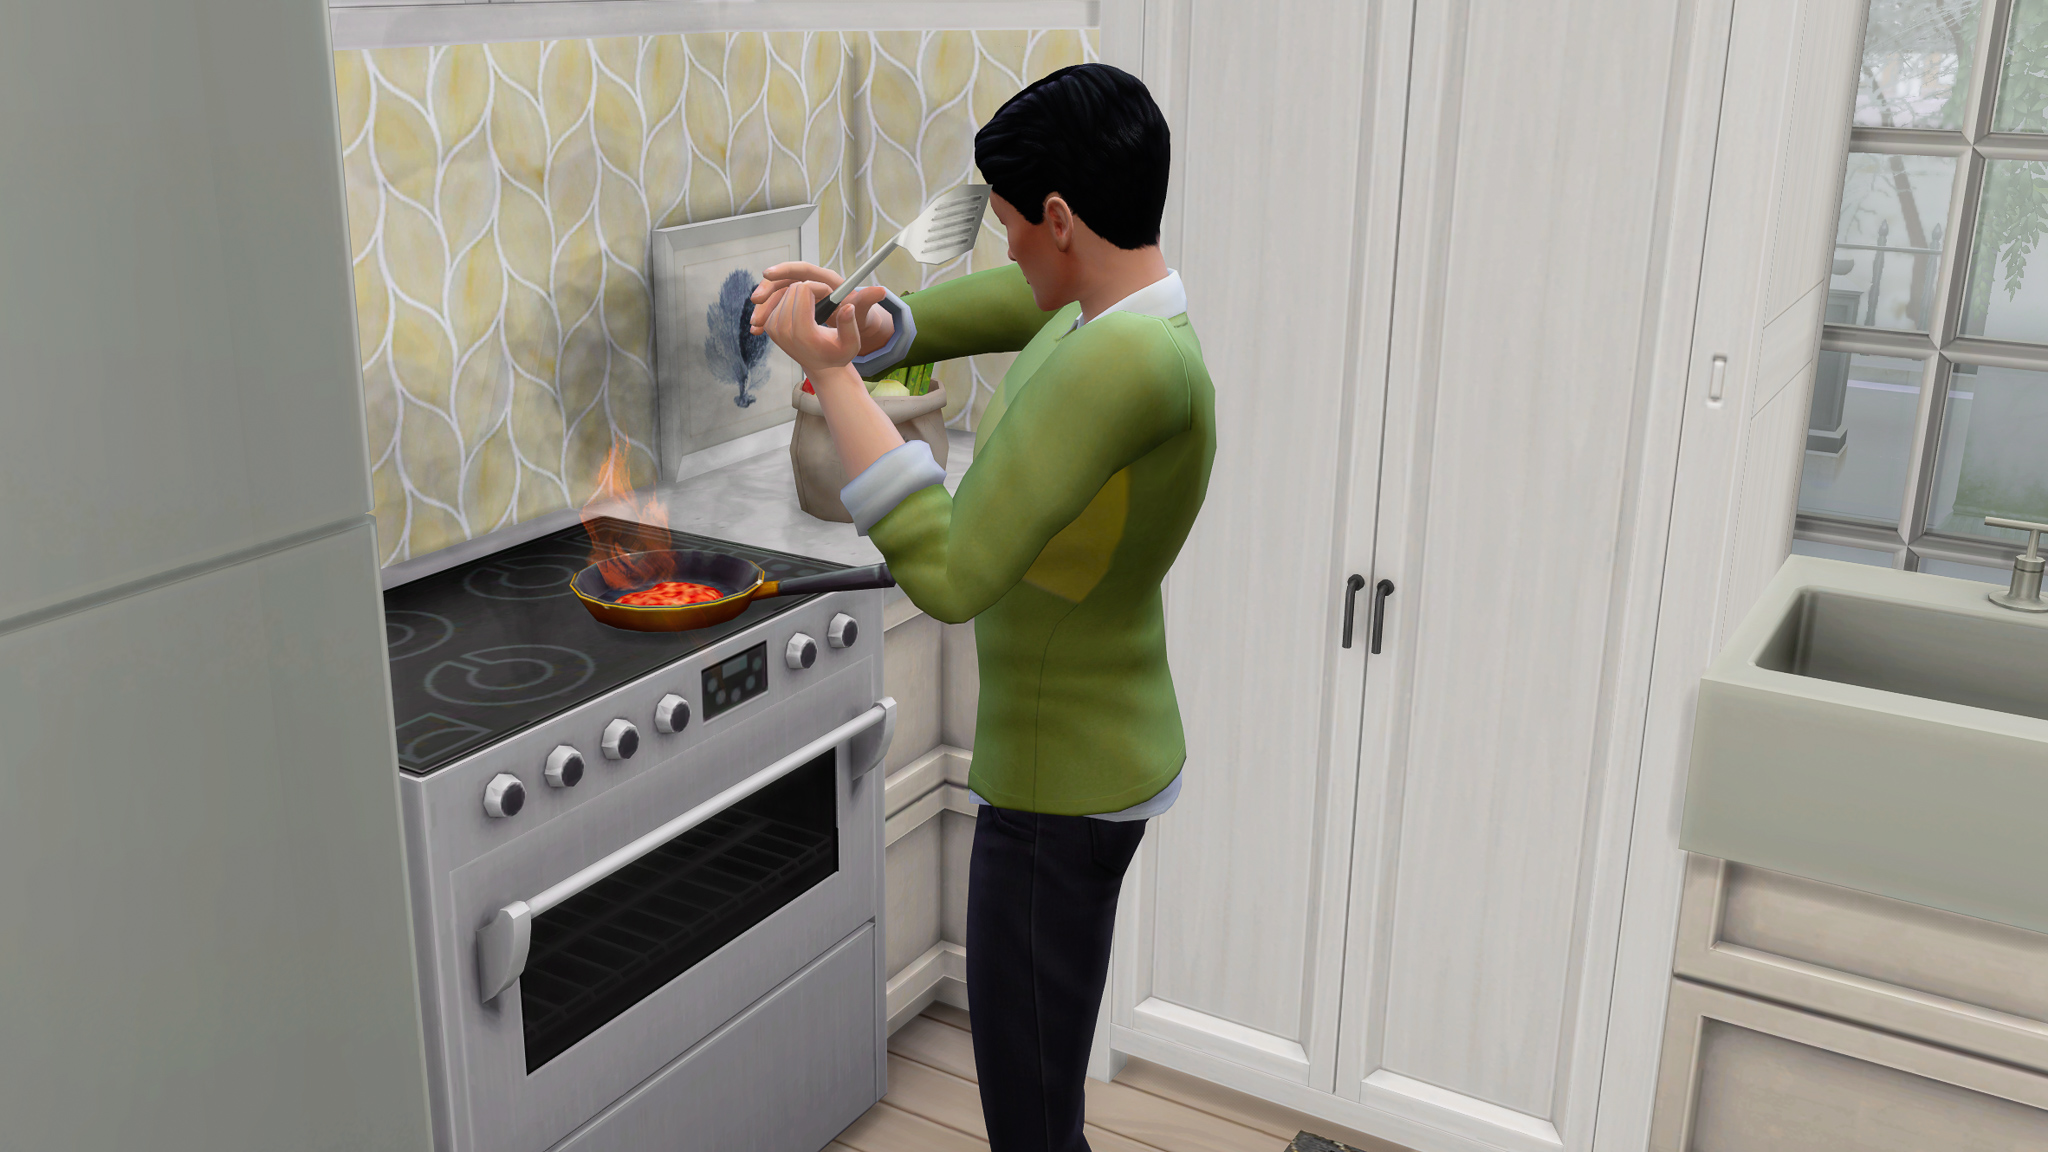 Asher uses the spatula to put out the slightly flaming food and things are okay. 